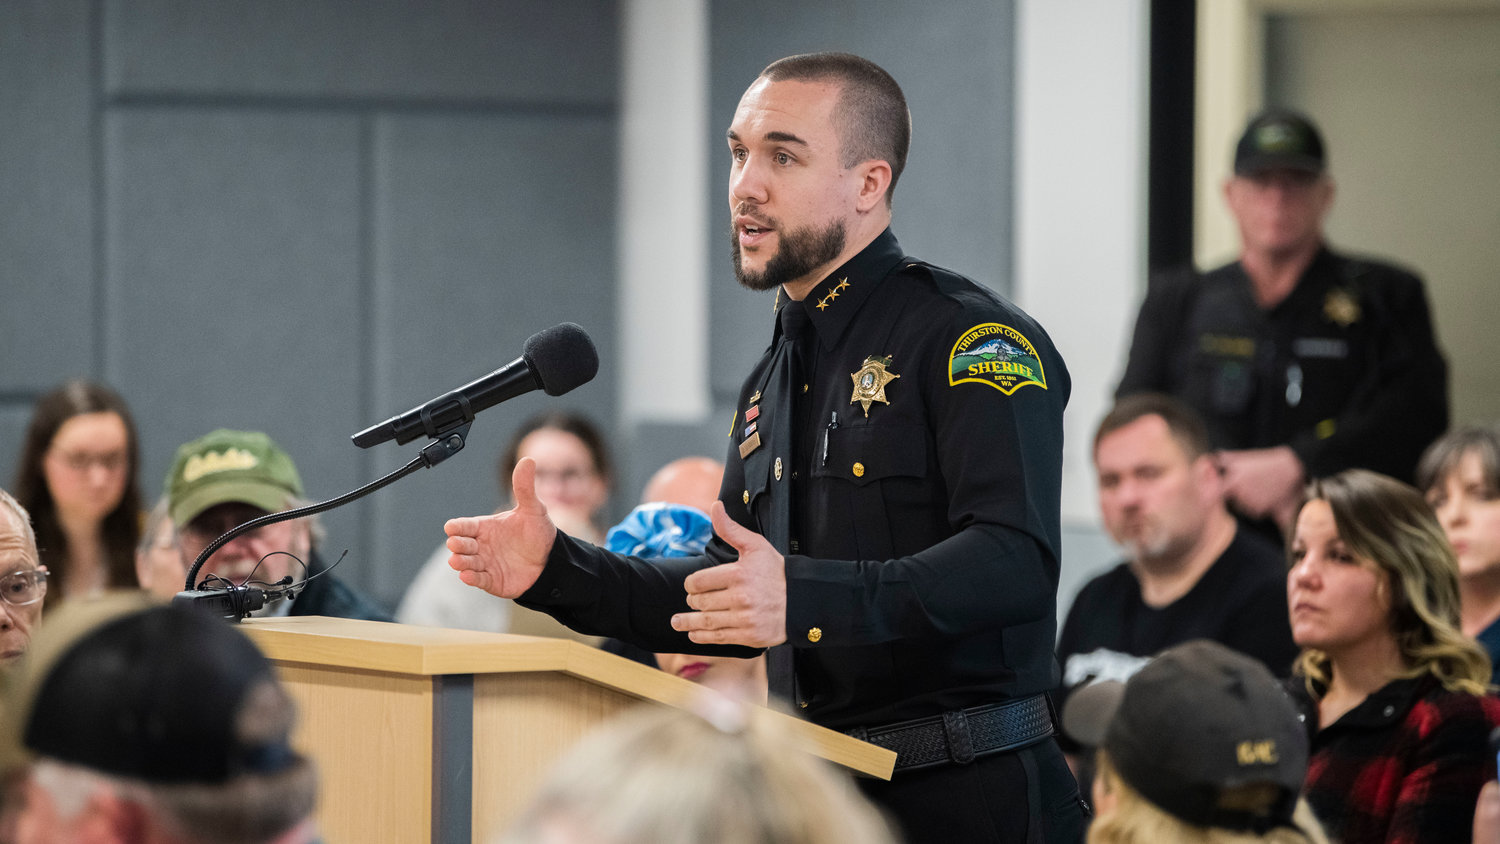 Thurston County Sheriff Derek Sanders brings up concerns with community safety mentioning limited resources and noting staffing when describing that a single deputy, at times, is responsible for all of “Rochester, Maytown, Littlerock, Tenino, and Bucoda,” during a meeting with Thurston County Commissioners in Olympia on Tuesday.